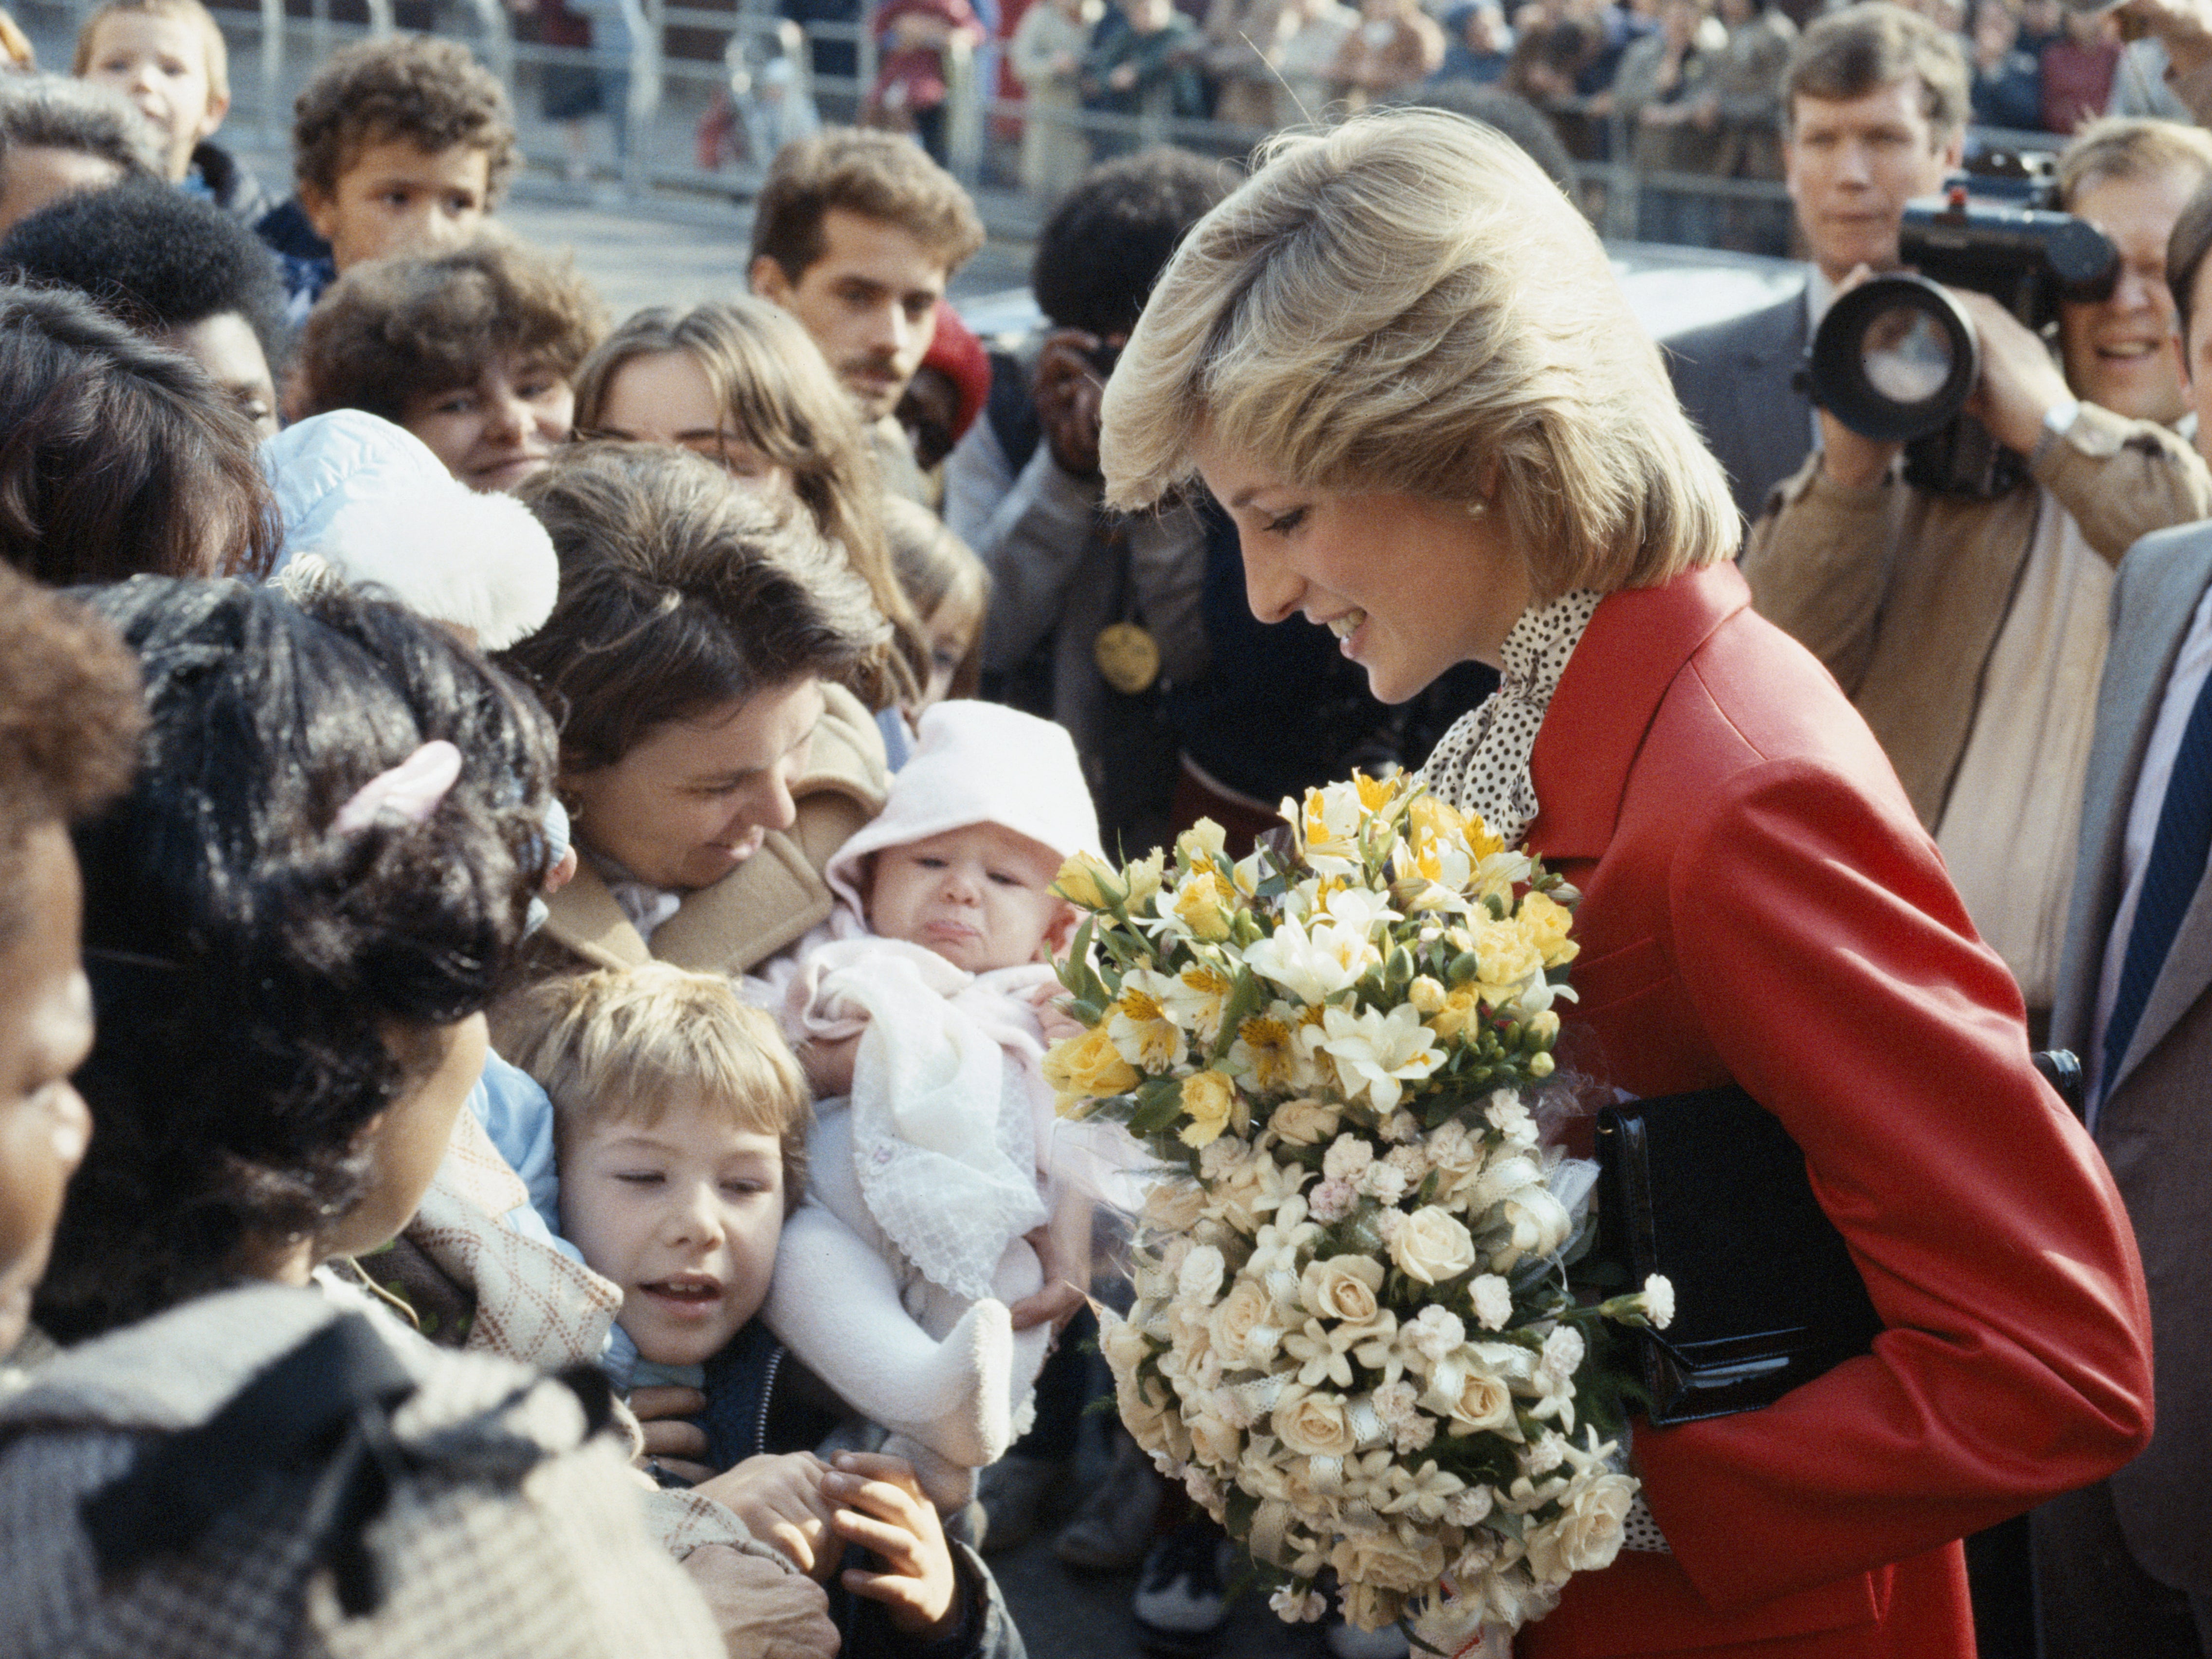 Princess Diana during a visit to a community centre in Brixton,London, 1983